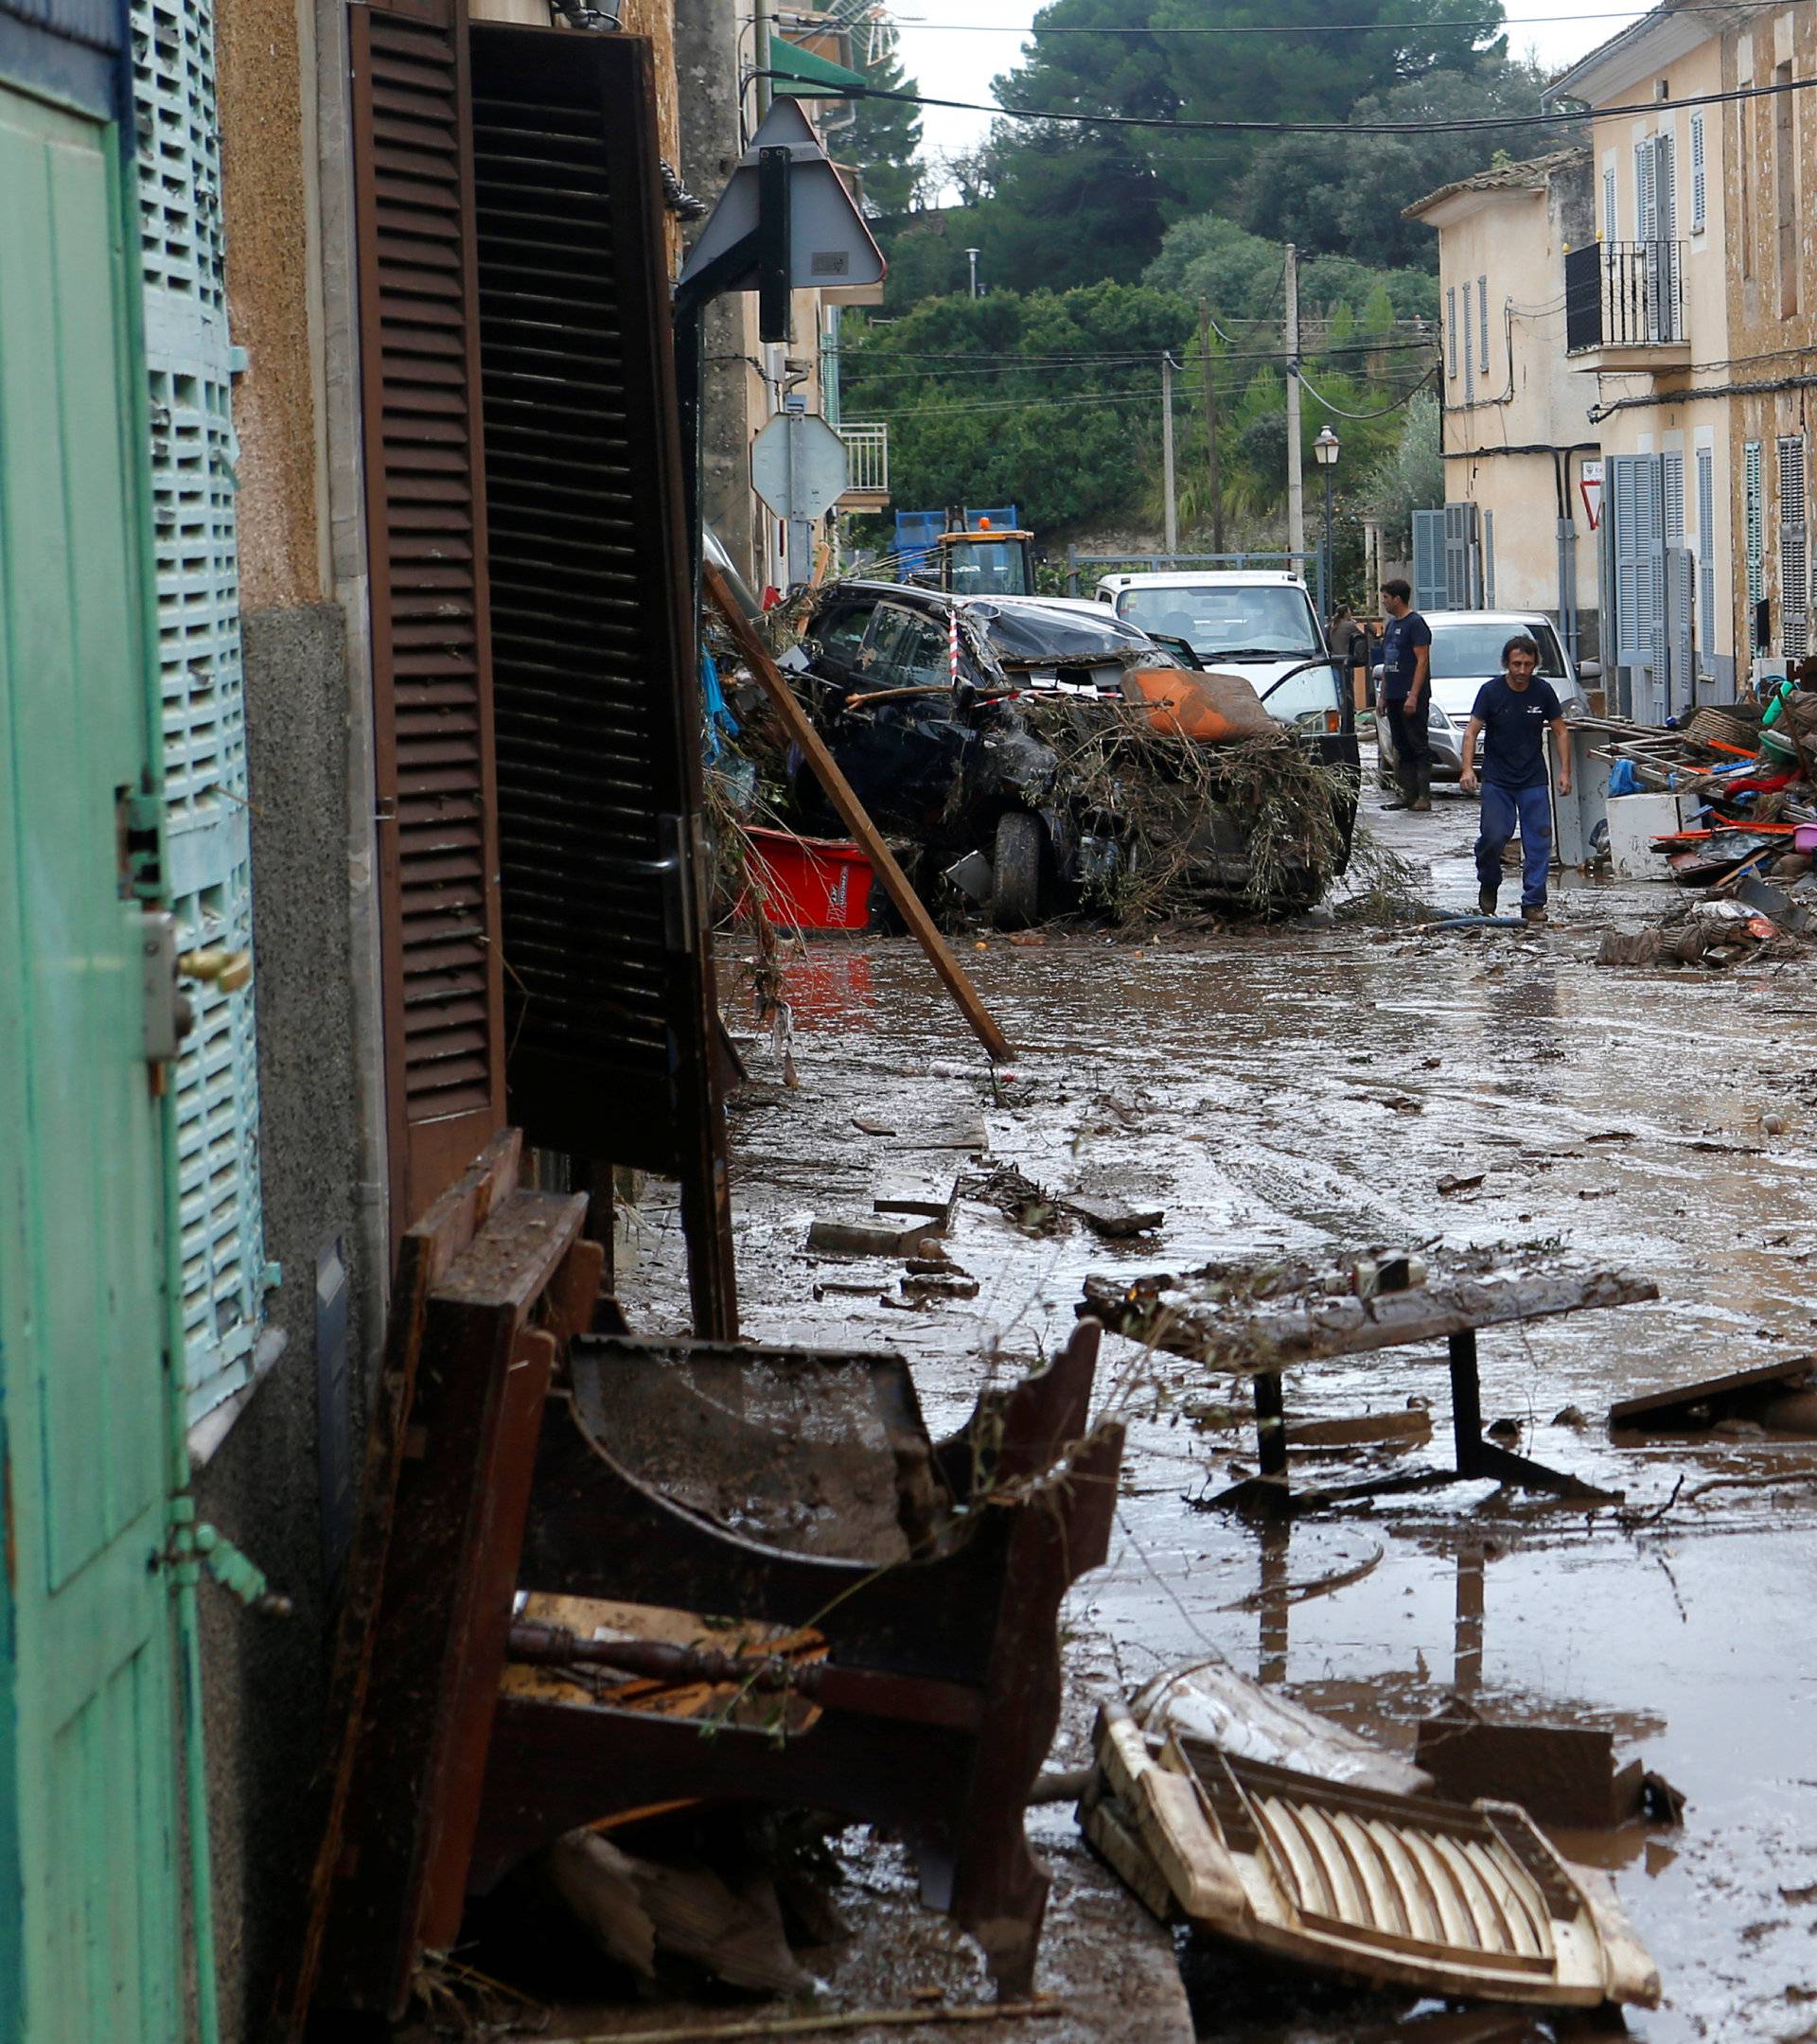 Debris is seen on the streets as heavy rain and flash floods hit Sant Llorenc de Cardassar on the island of Mallorca